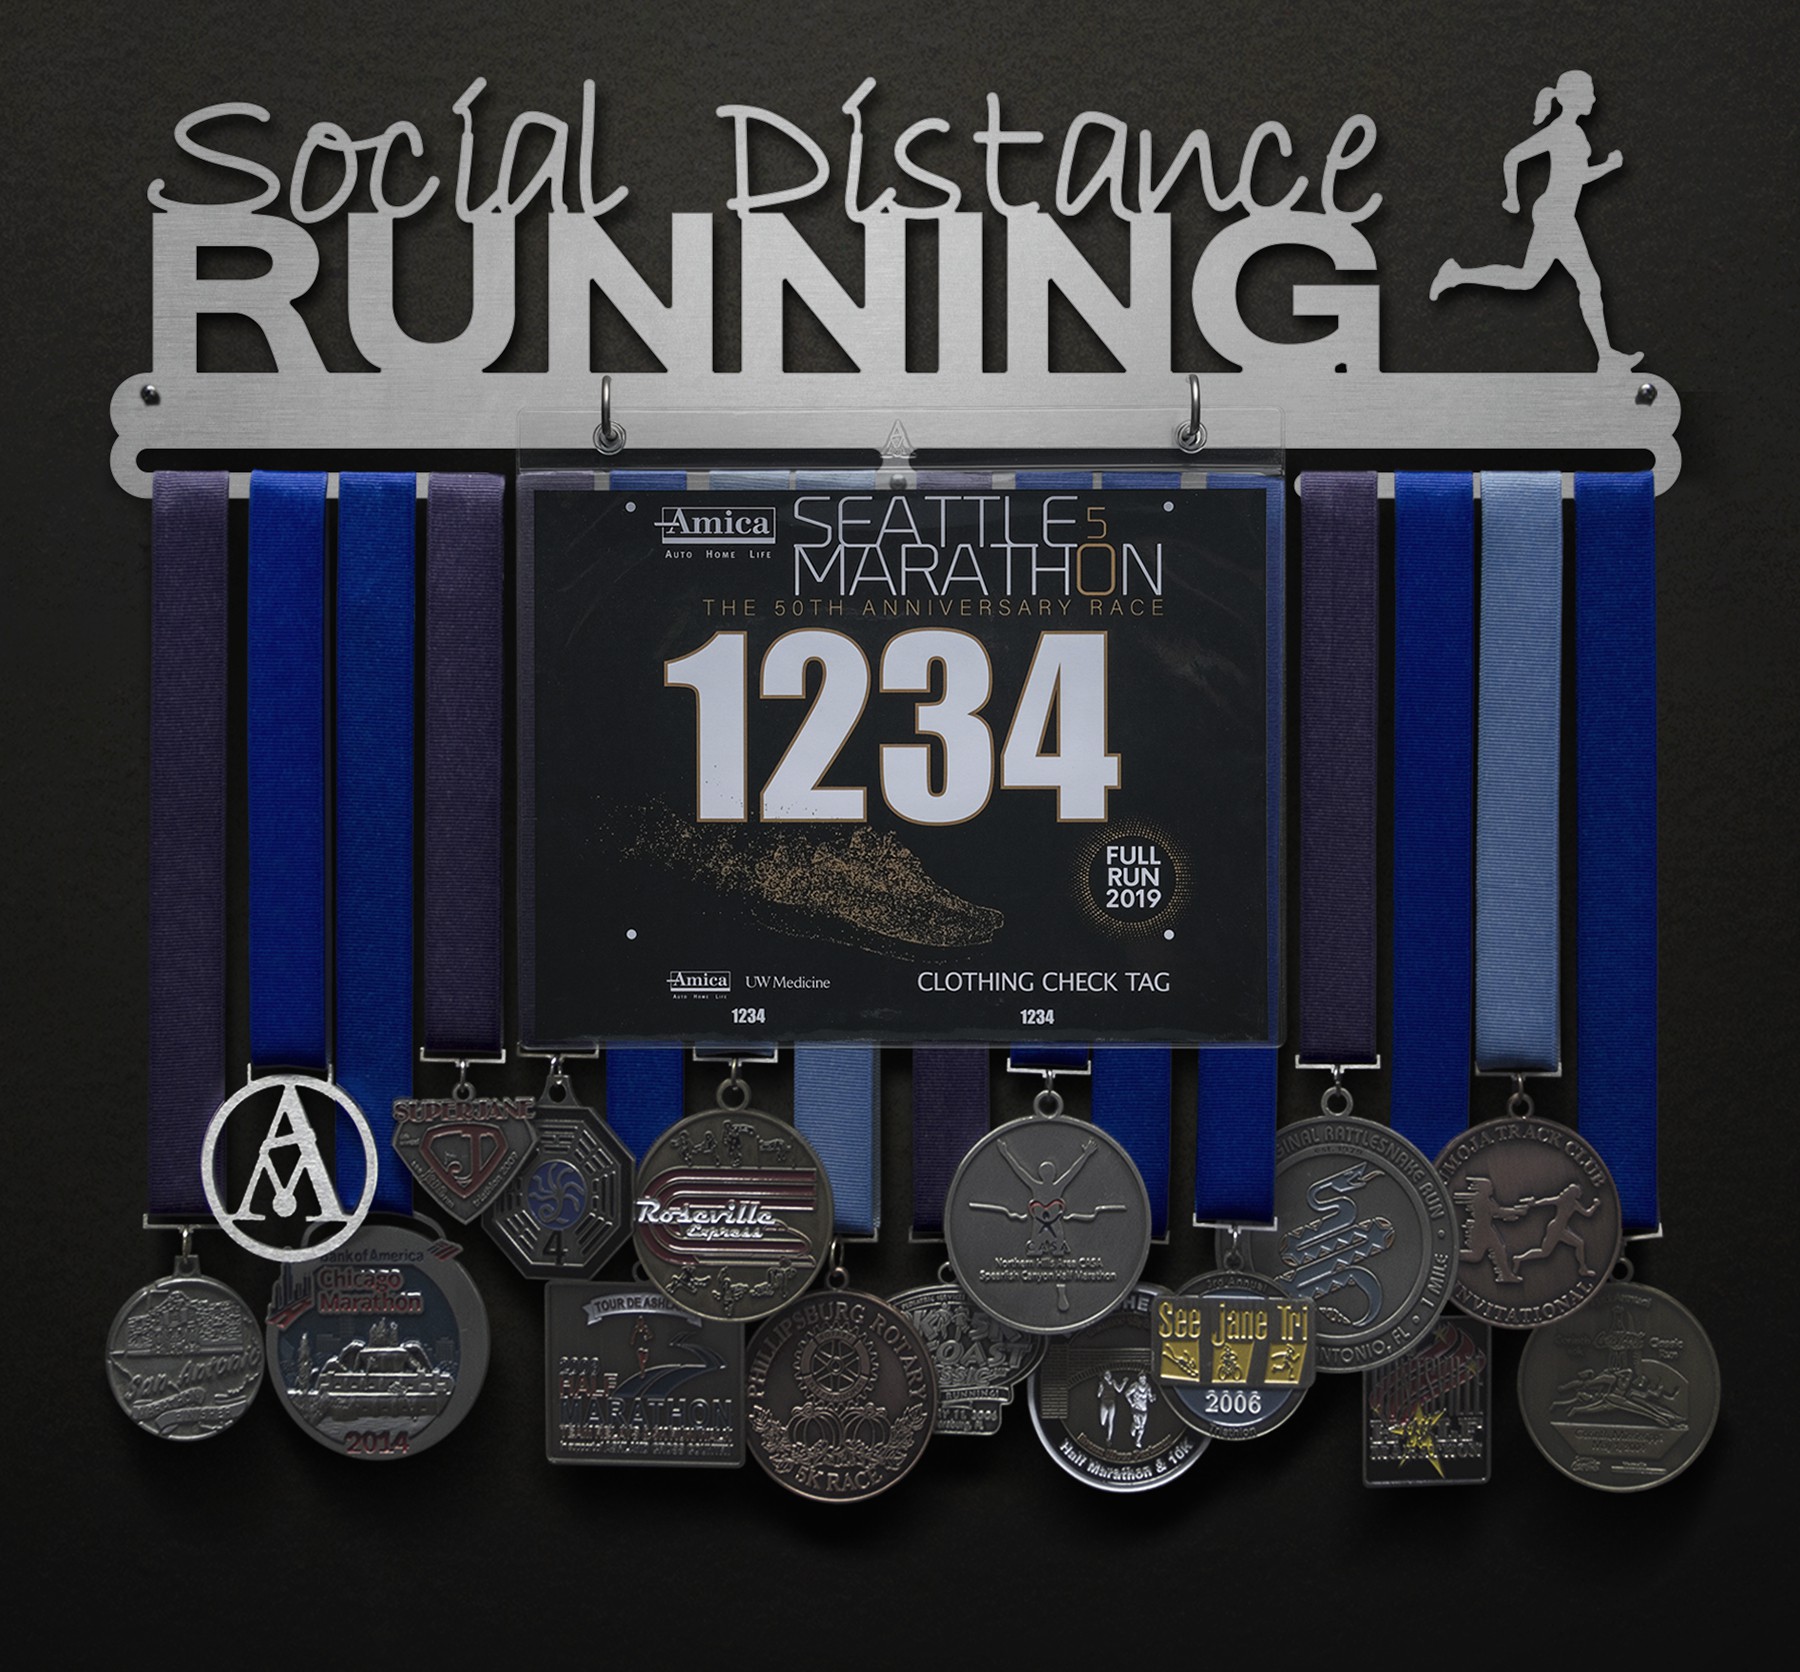 Social Distance Running Bib and Medal Display - Female